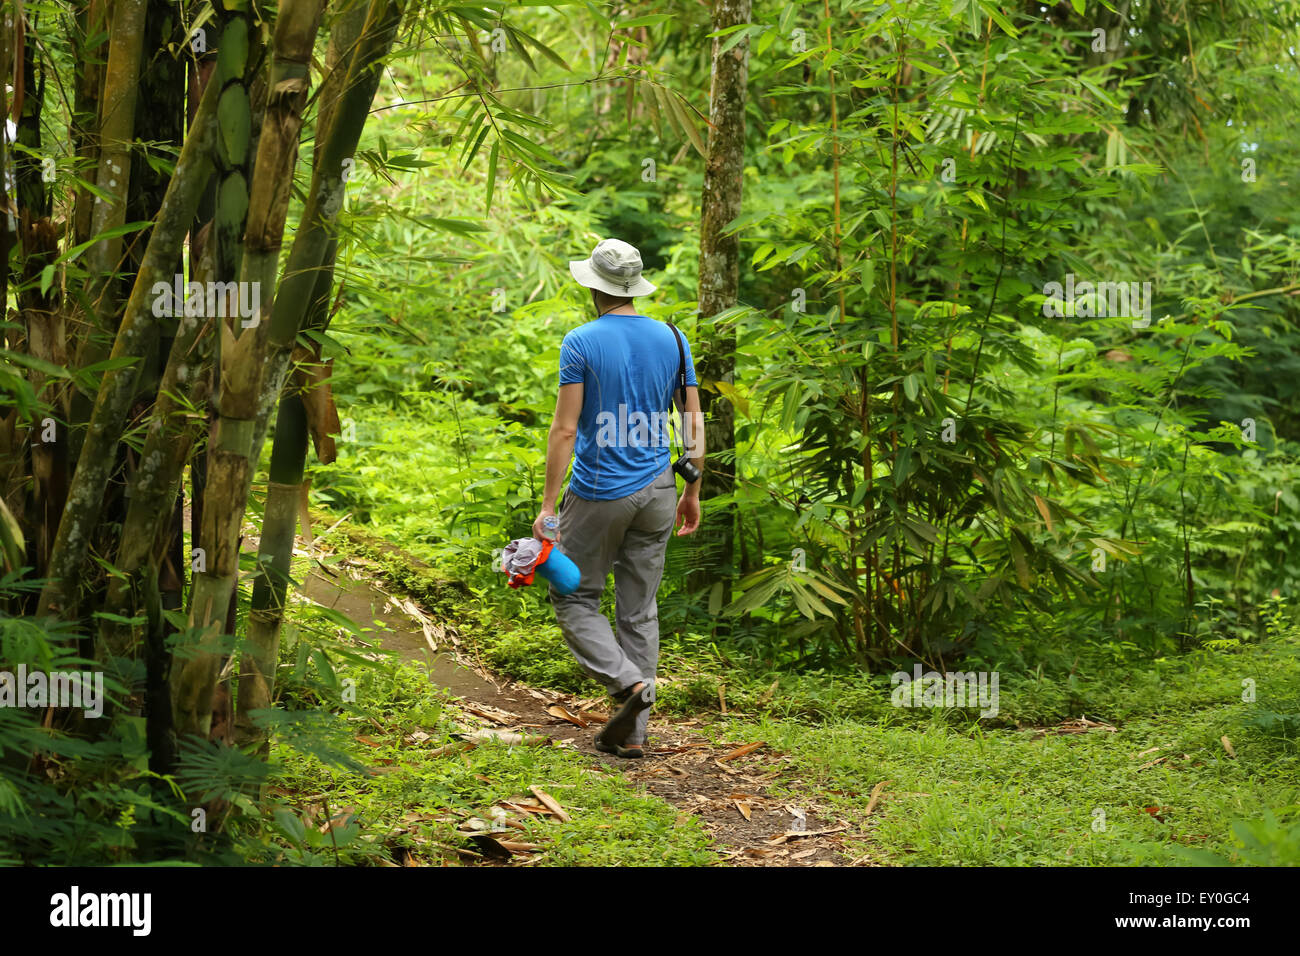 One young male adult walking through the rainforest in Bali, Indonesia. Wearing blue sports shirt, grey pants, hat, holding came Stock Photo